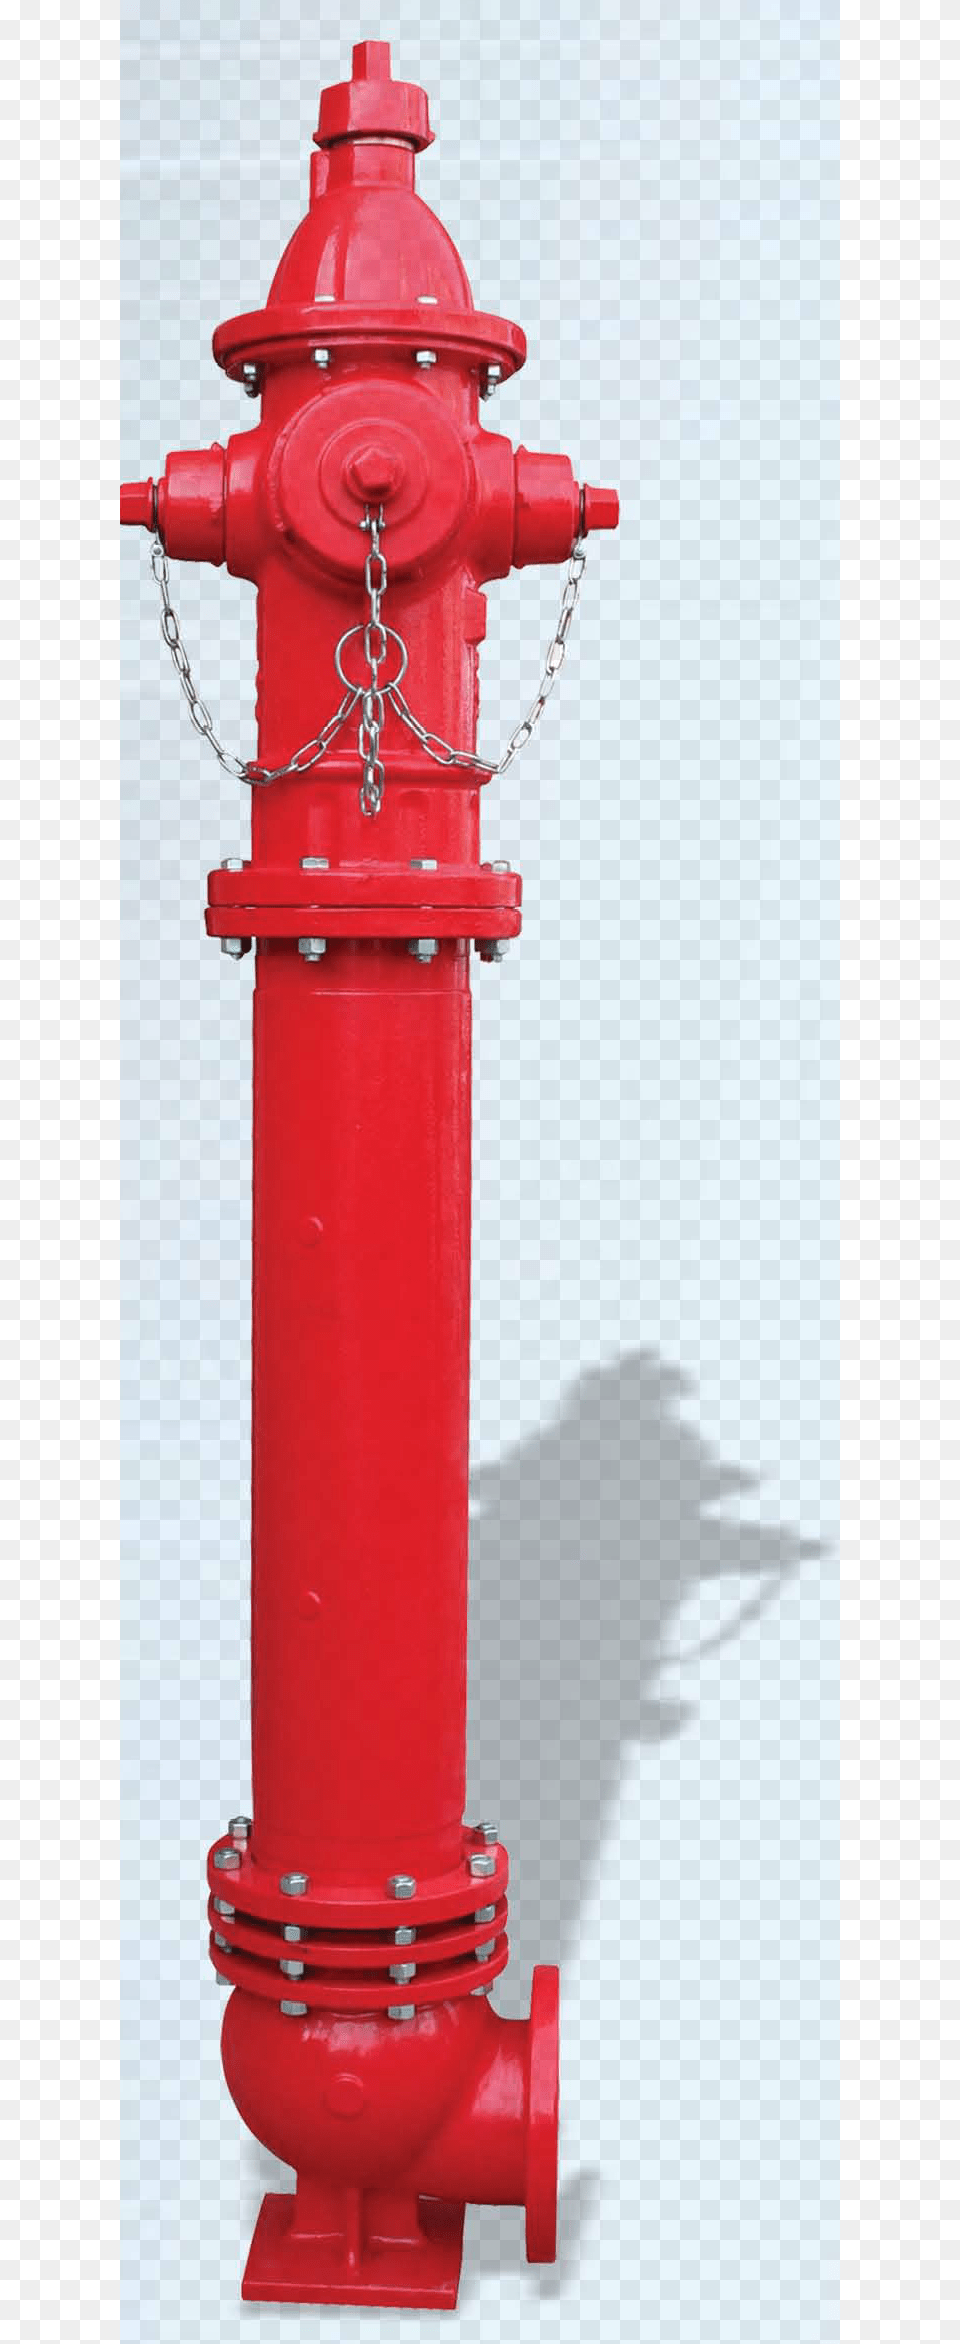 Fire Hydrant, Fire Hydrant Png